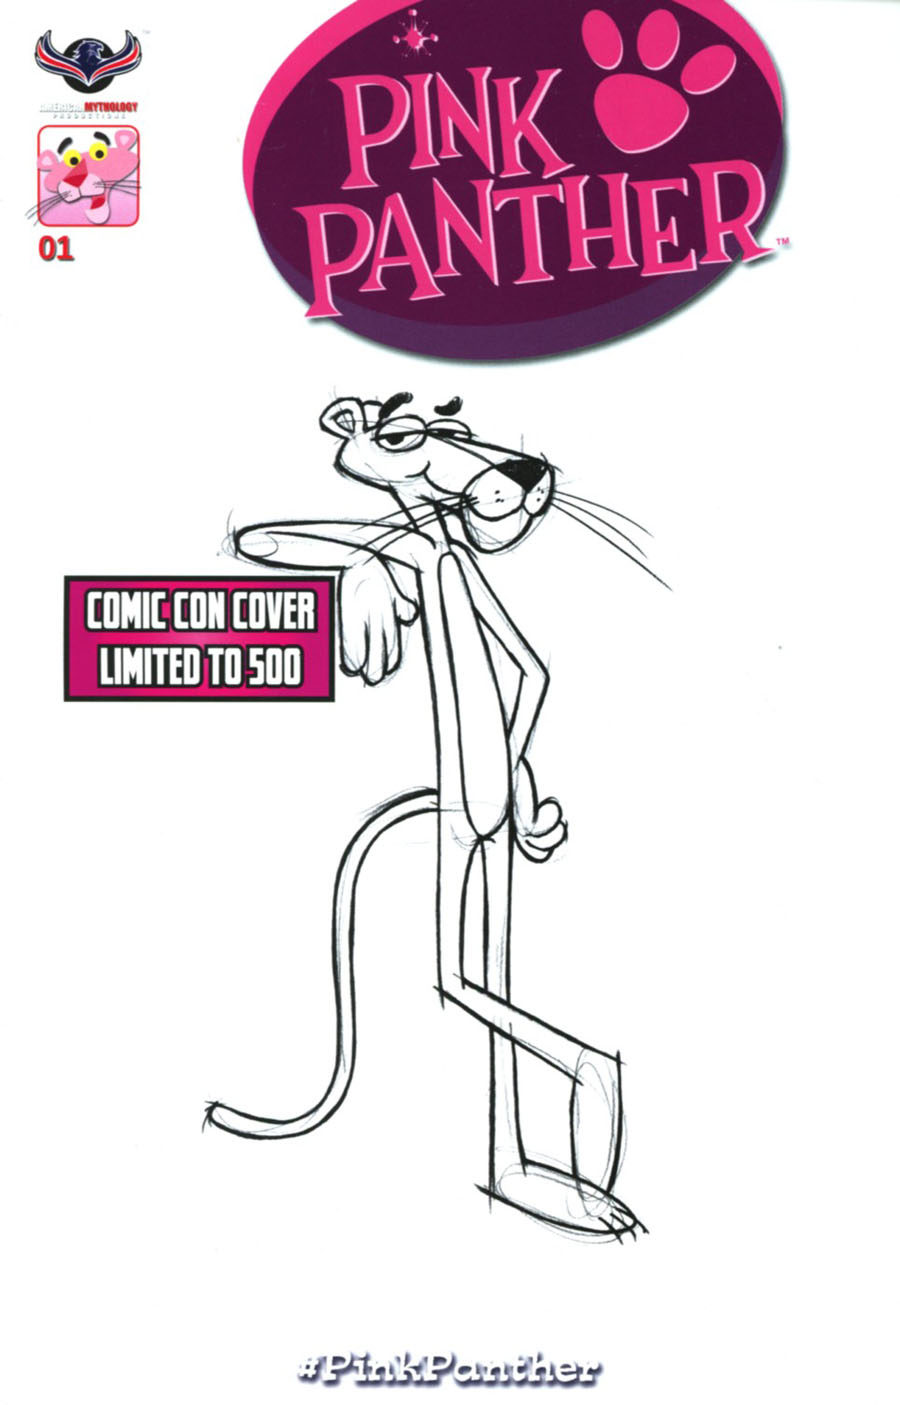 Pink Panther Vol 3 #1 Cover F Baltimore Comic Con Exclusive Variant Cover